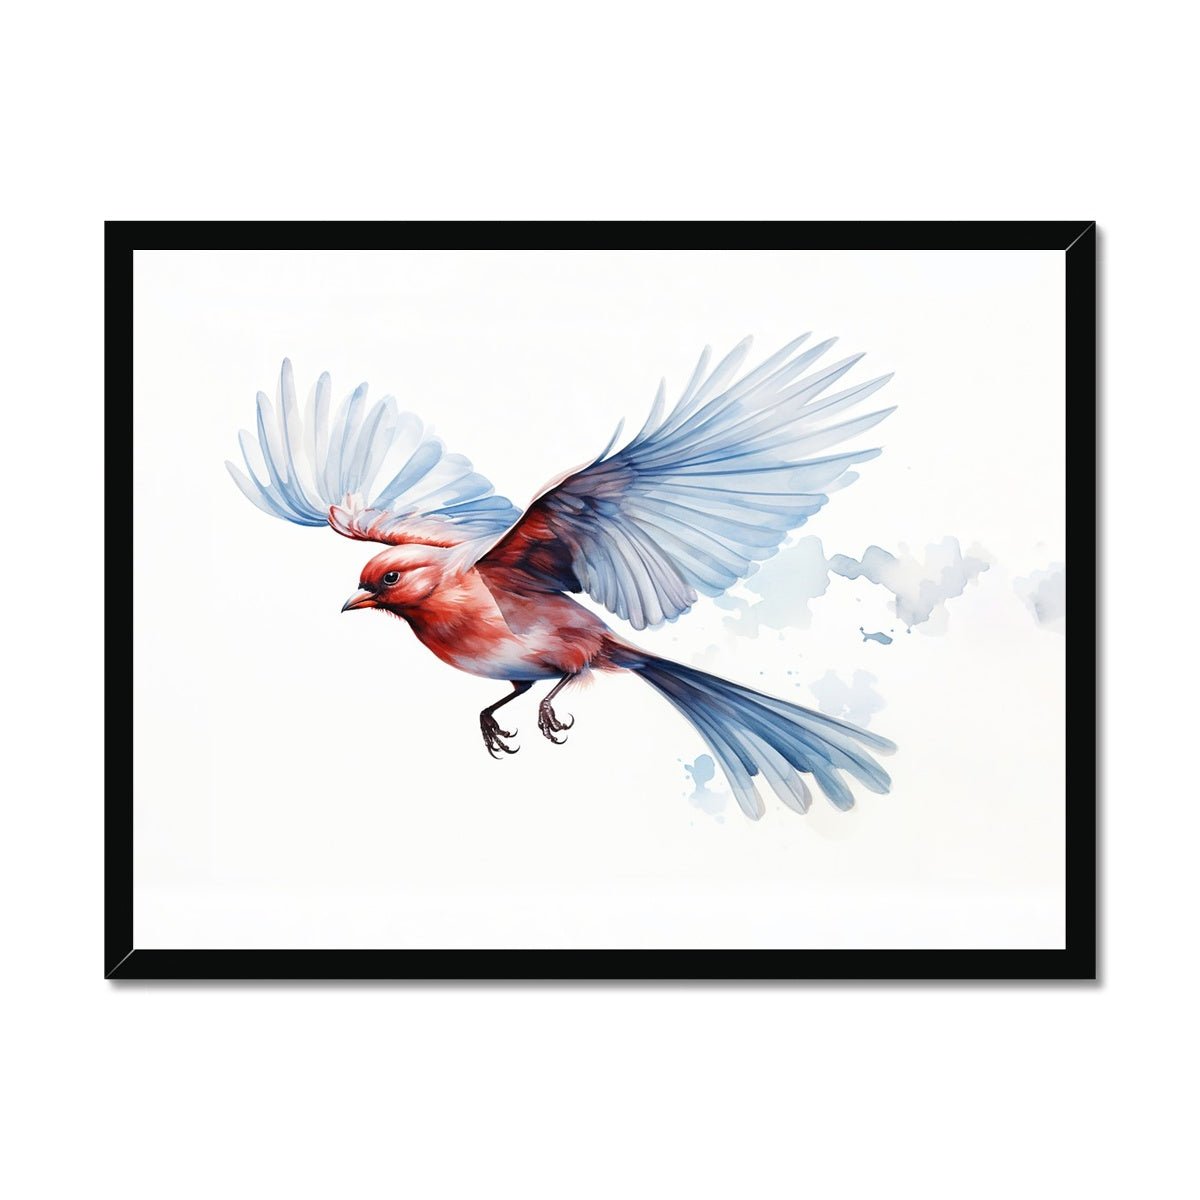 Feathered Creations - Bird 06 1 - Animal Poster Print by doingly